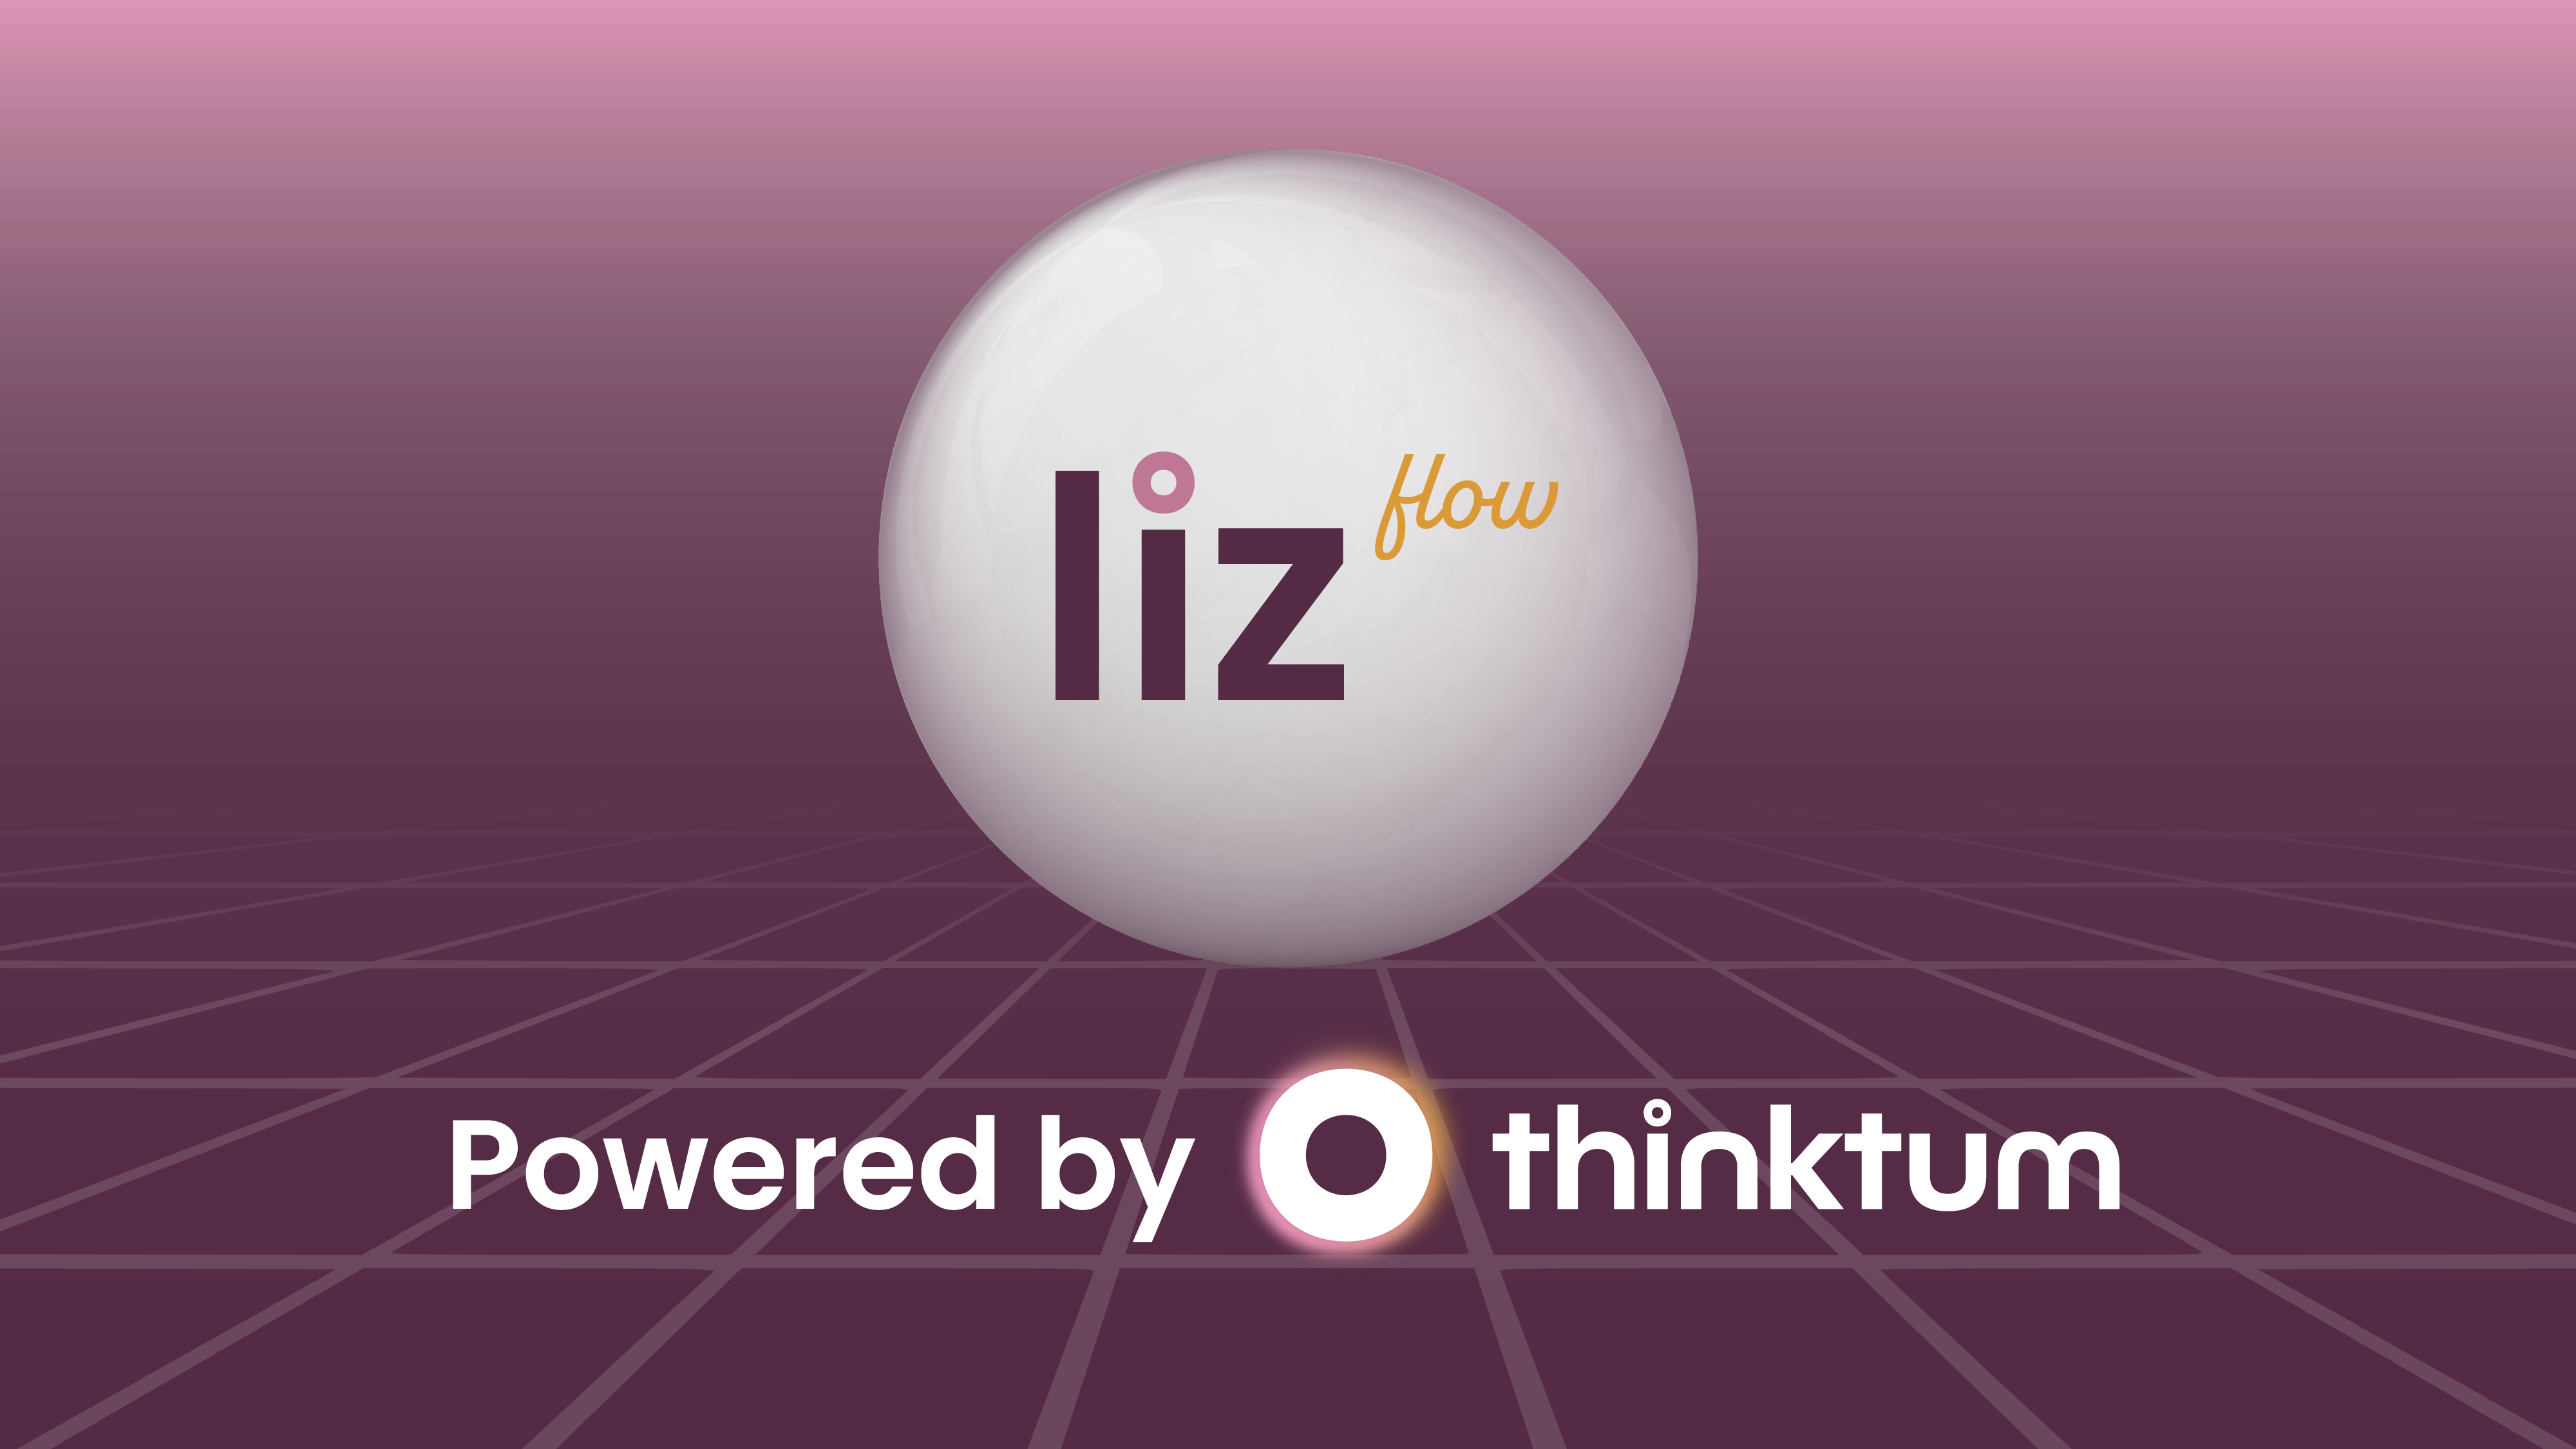 Purple background, white circle with liz flow on it. Powered by thinktum below.